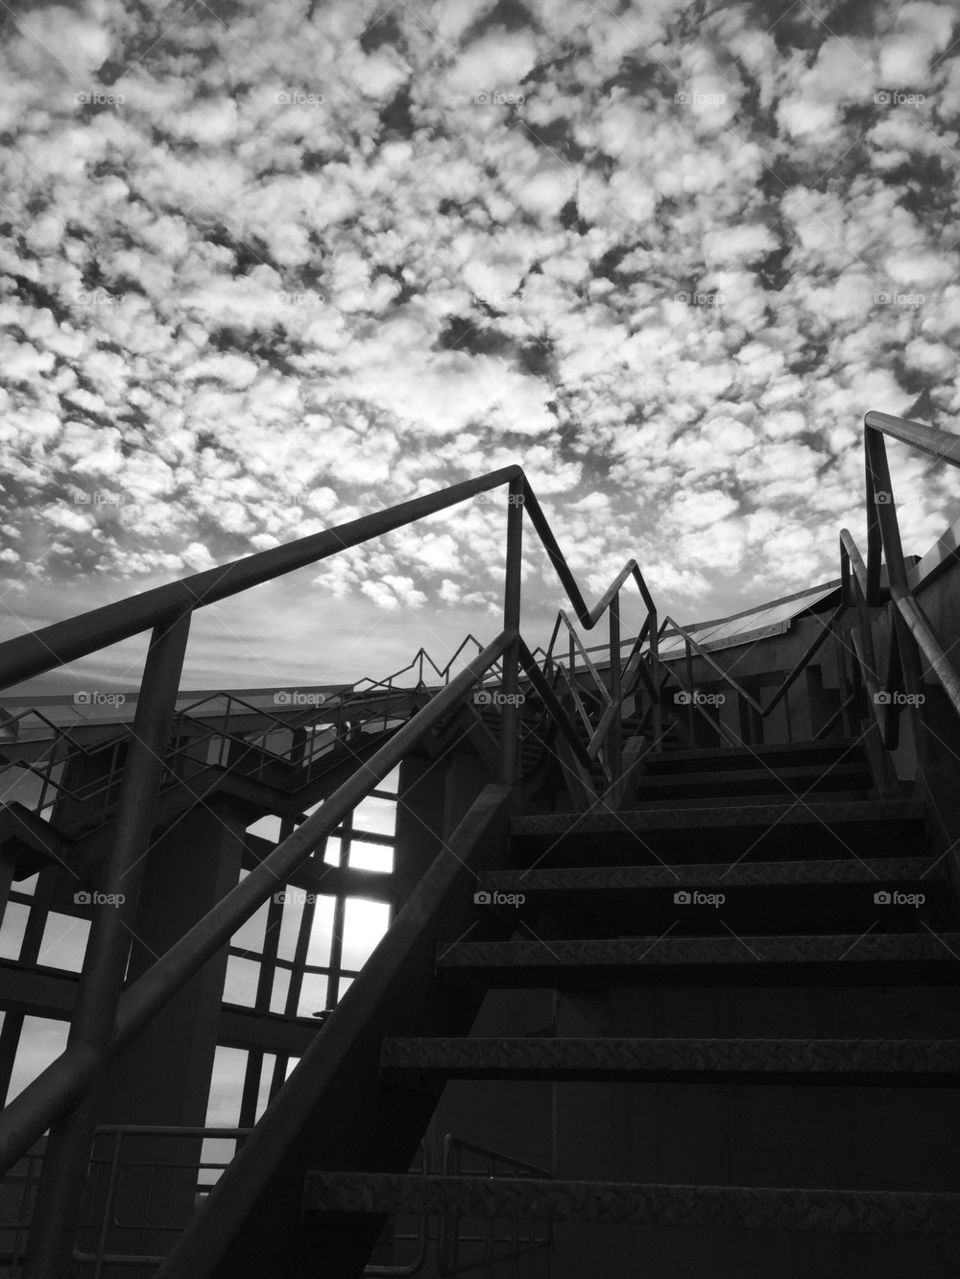 Stairway to the clouds 